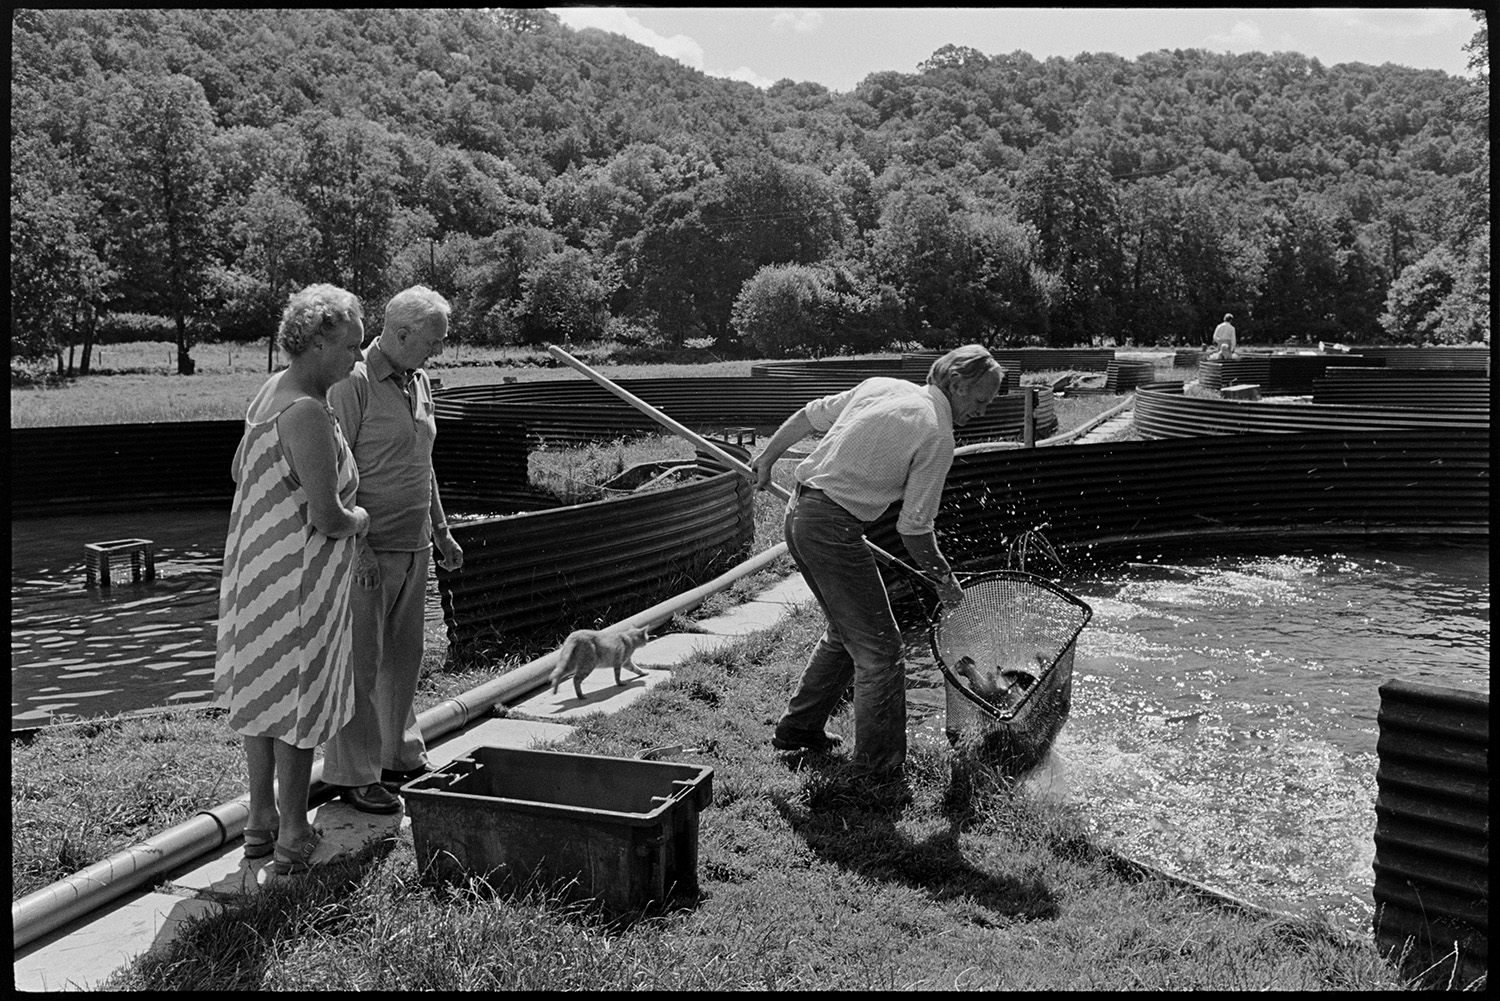 Catching fish at fish farm ponds. 
[Robin Boa catching fish with a large net from a circular pond with corrugated iron sides at a fish farm at Head Mill, Kings Nympton. A man and woman are watching him and a cat is walking past. Other ponds can be seen in the background with woodland beyond.]